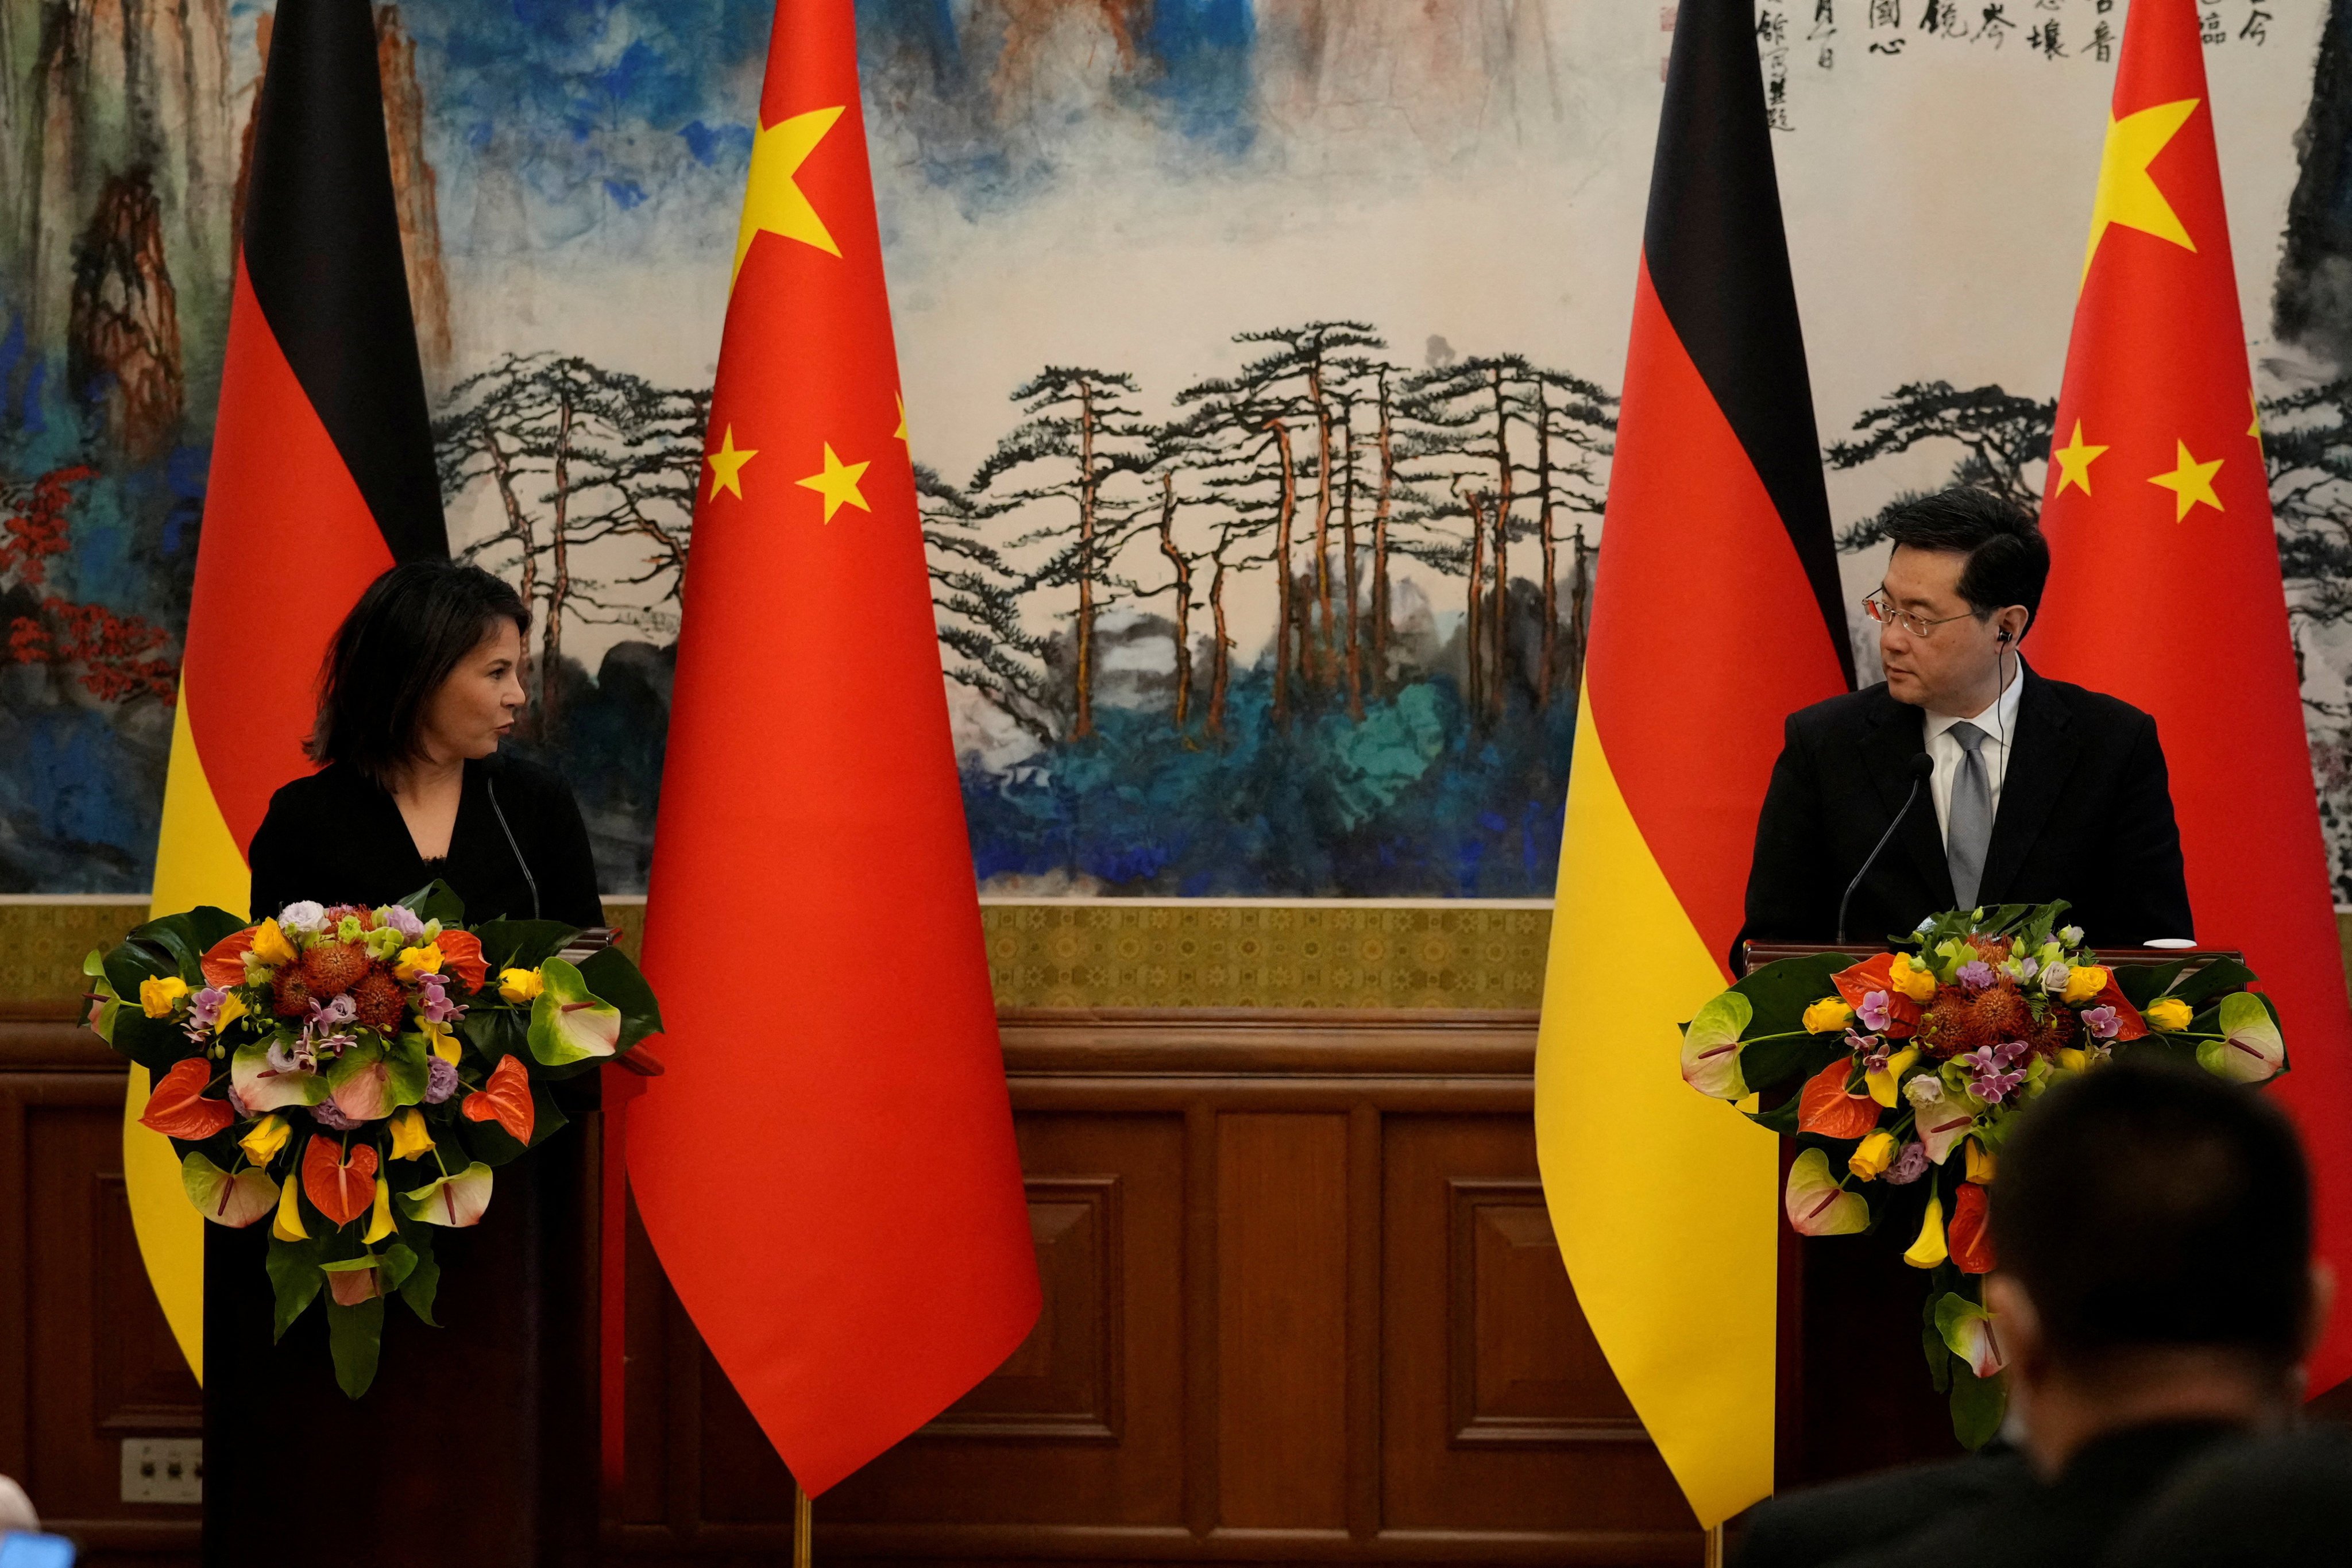 German Foreign Minister Annalena Baerbock and Chinese Foreign Minister Qin Gang attend a joint press conference at the Diaoyutai State Guesthouse in Beijing on April 14. Photo: Reuters